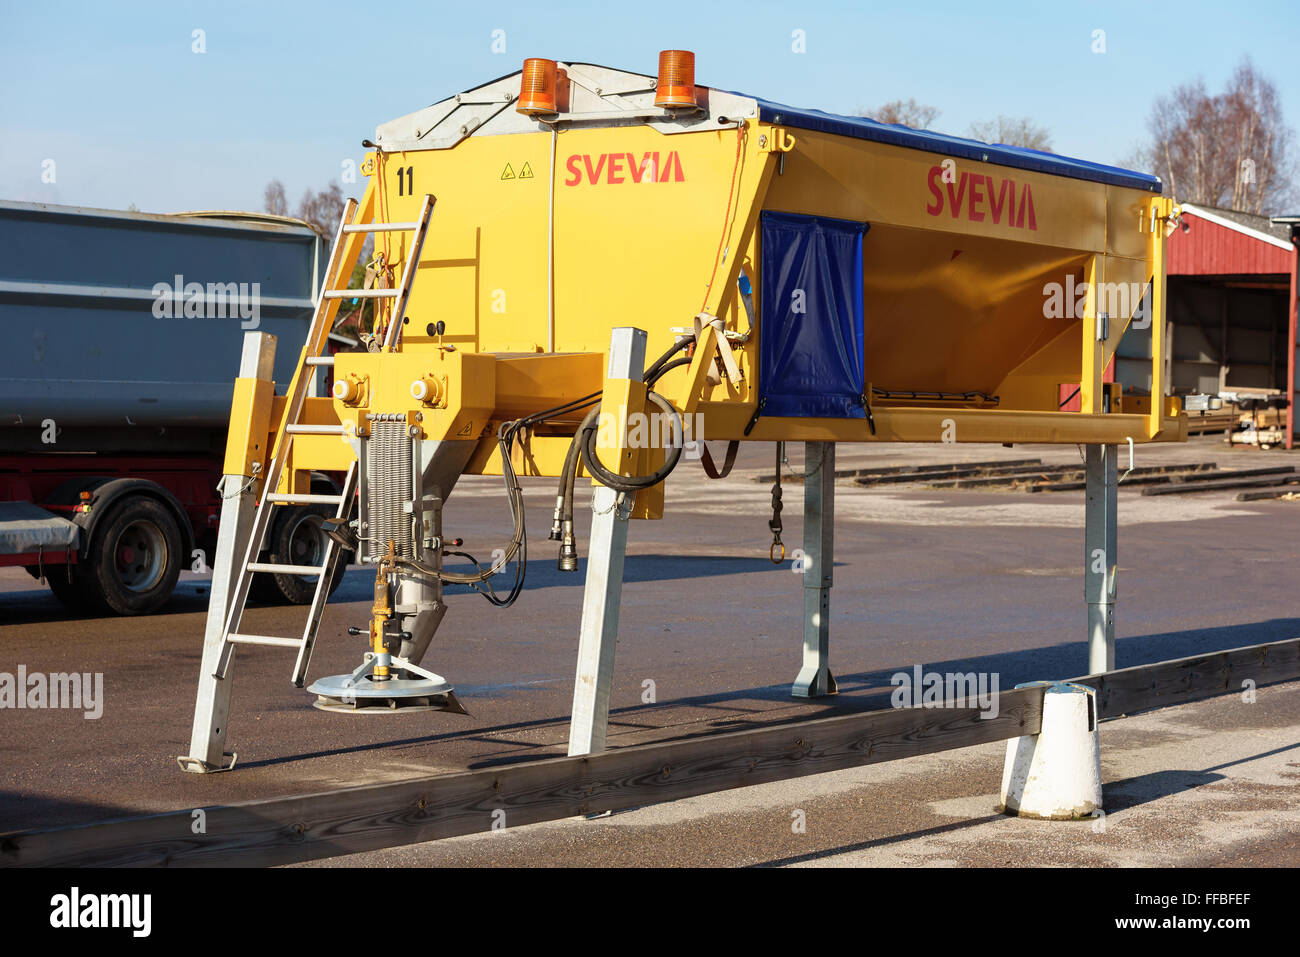 Brakne-Hoby, Sweden - February 07, 2016: A bright yellow Svevia road salt spreader stand on stilts on a parking lot outside a ha Stock Photo